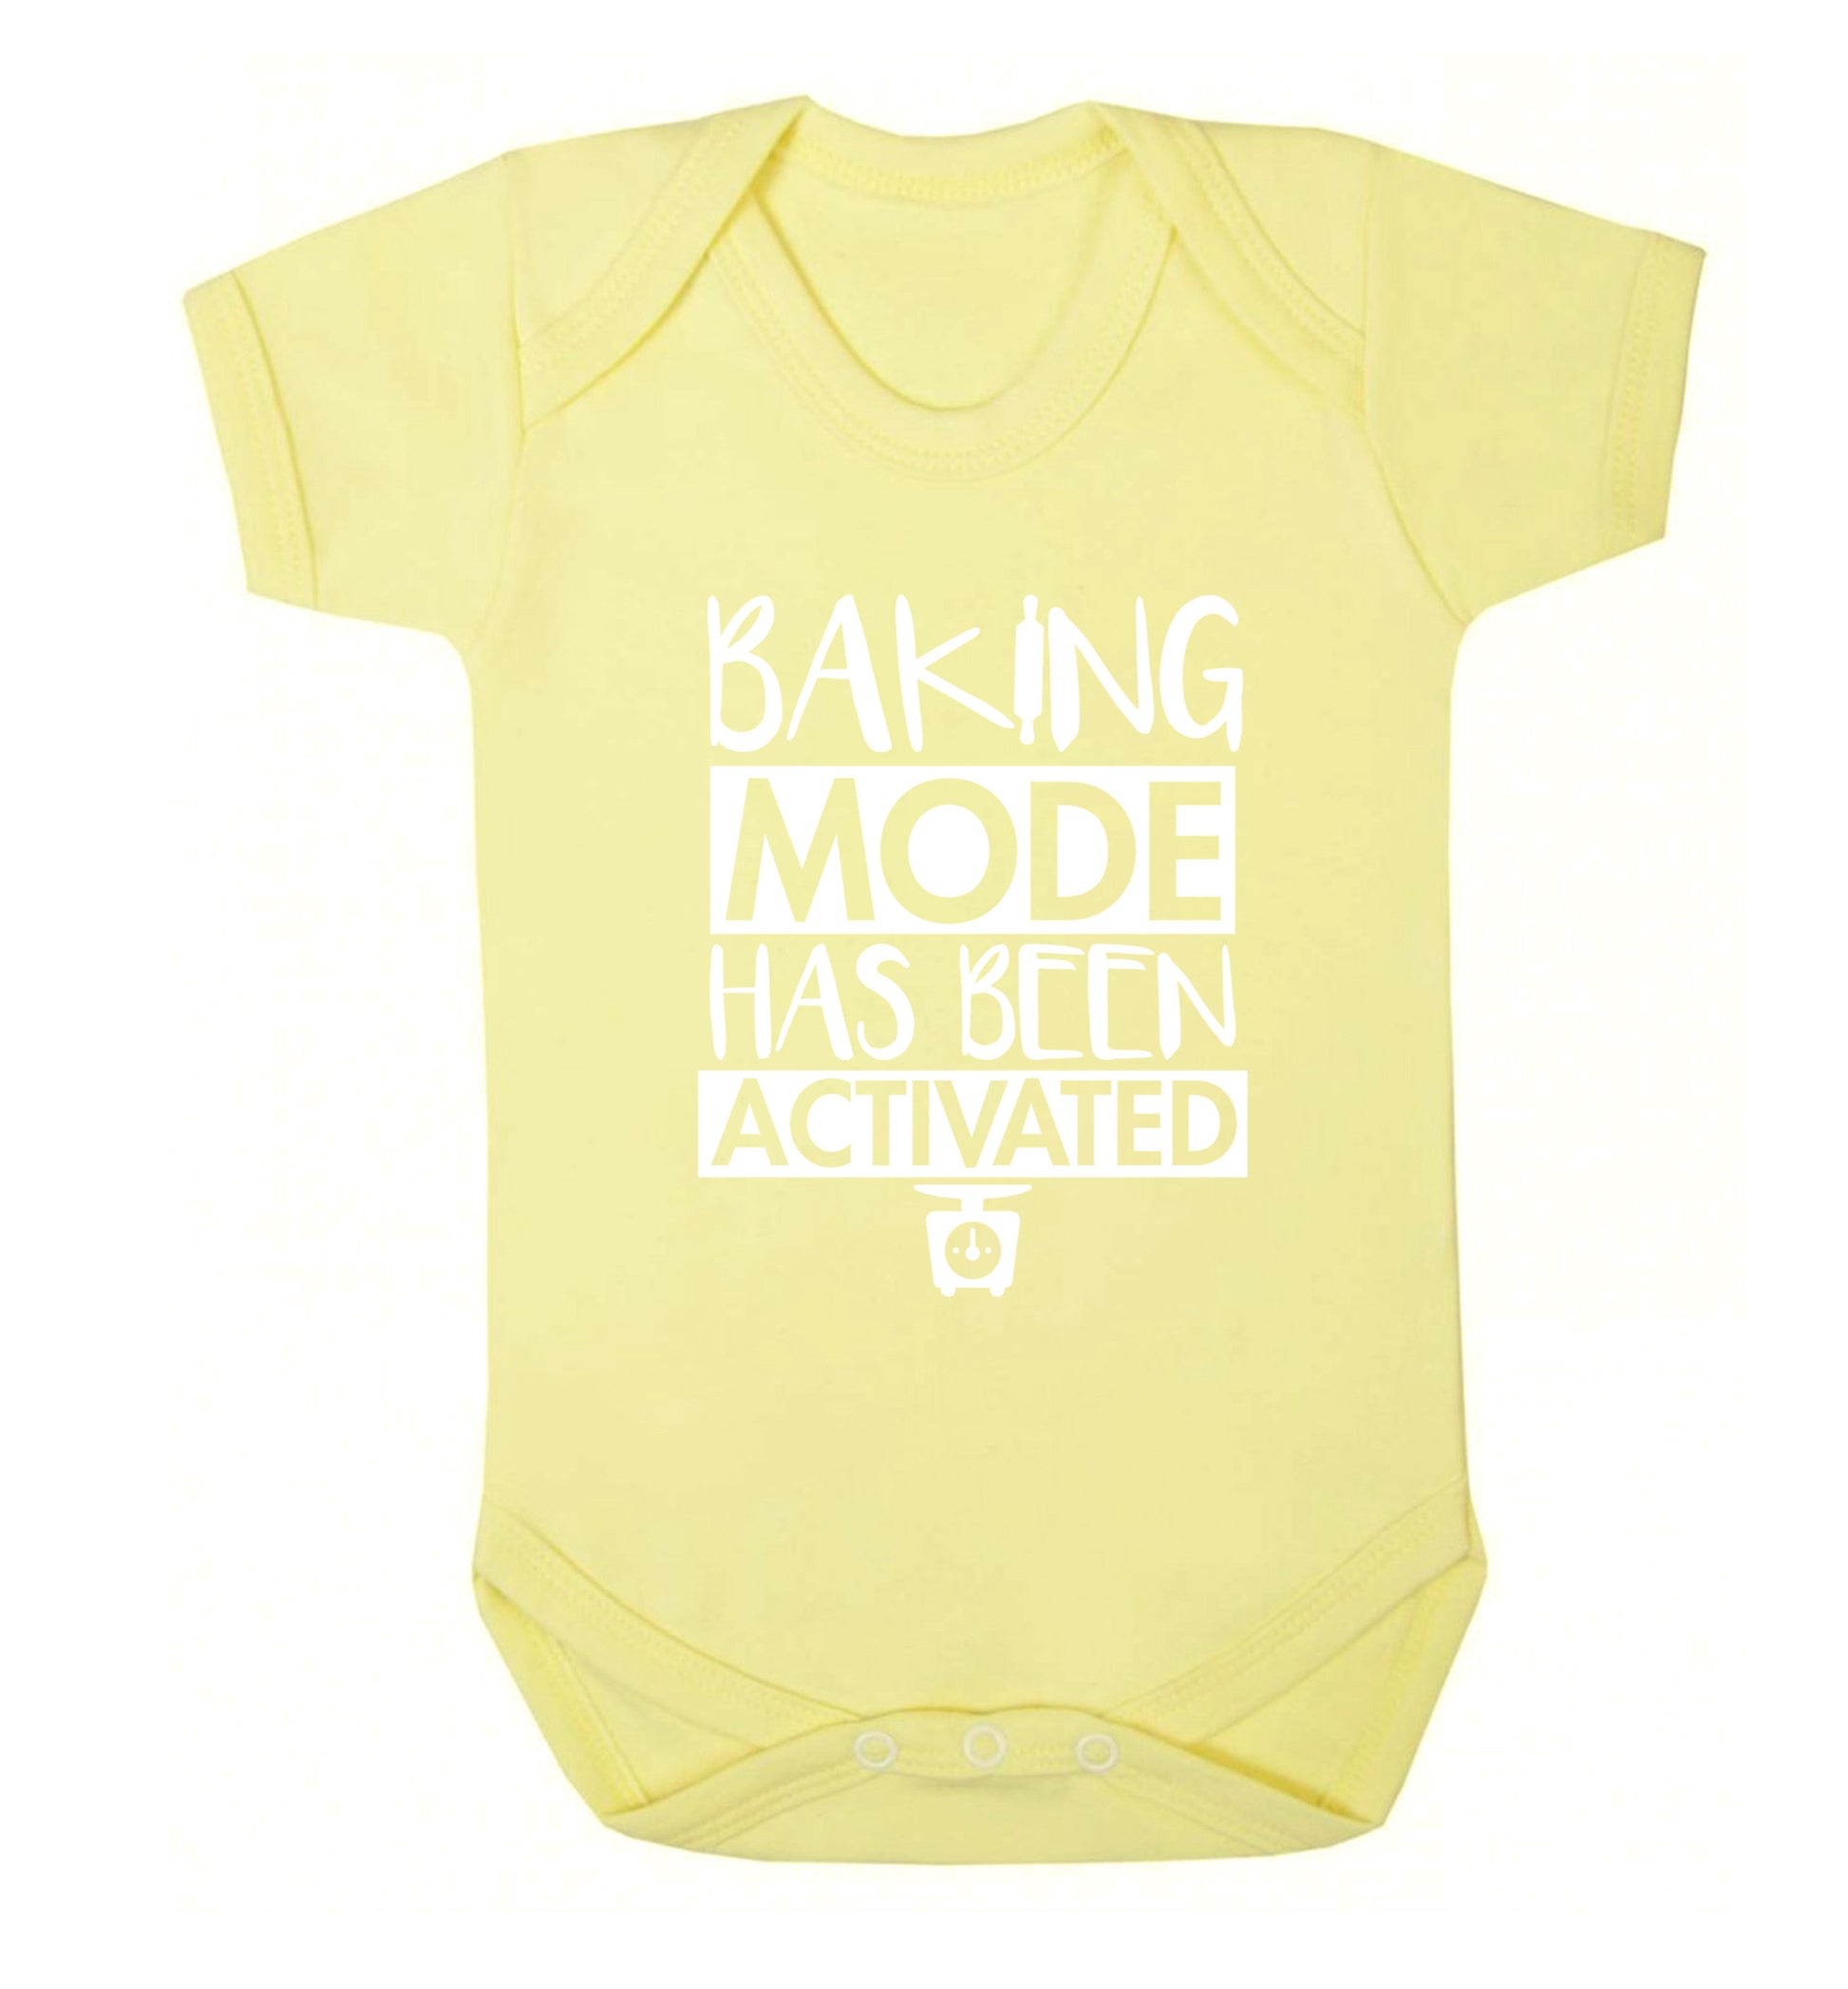 Baking mode has been activated Baby Vest pale yellow 18-24 months